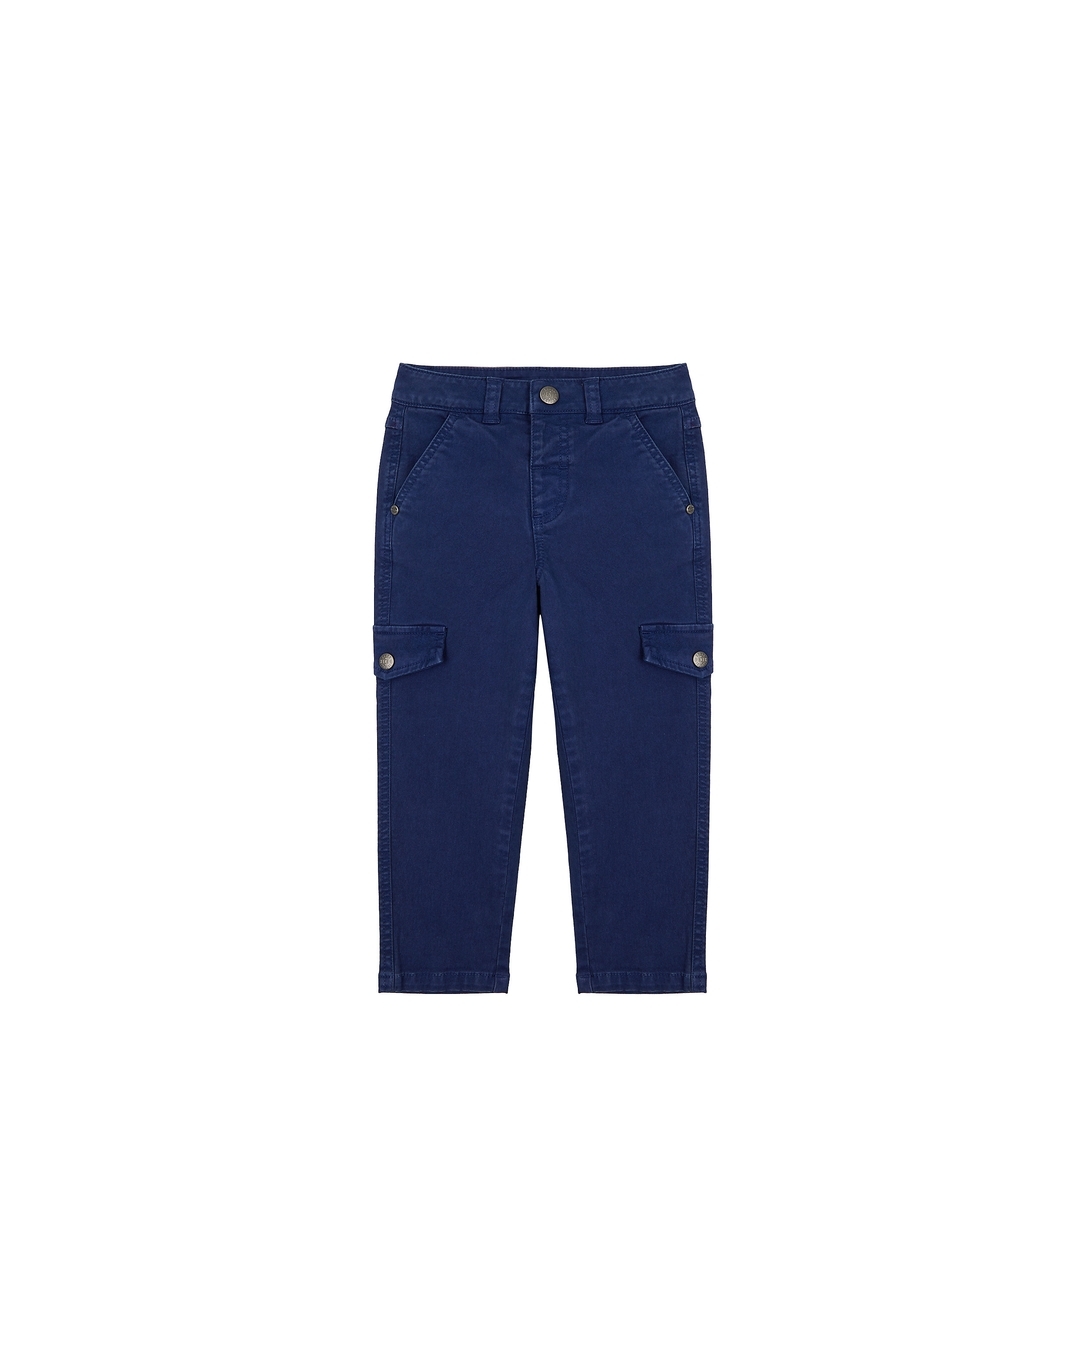 Buy Boys Cargo Trousers - Navy Online at Best Price | Mothercare India